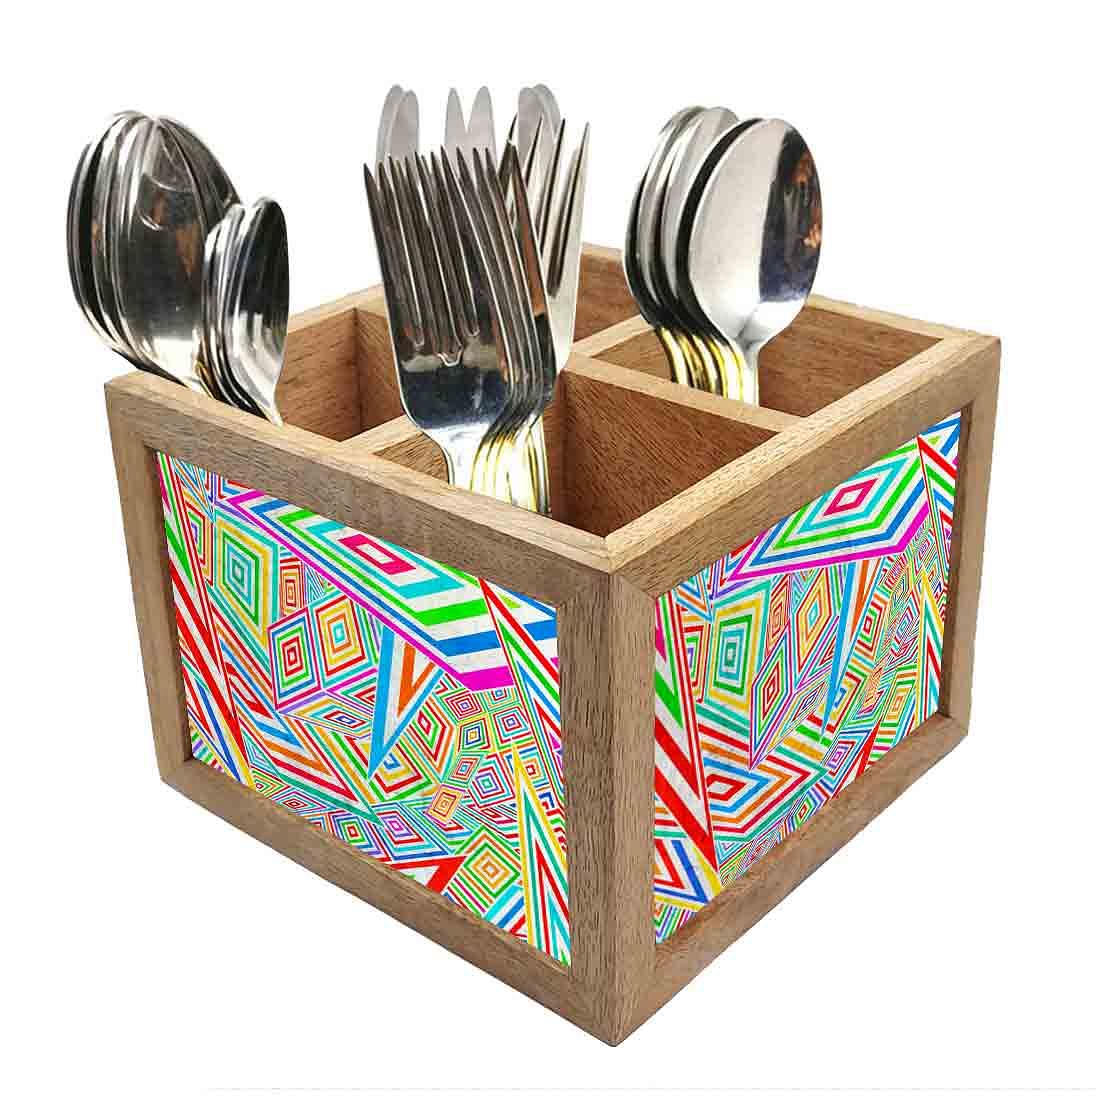 Kaleidoscope Cutlery Holder Stand Silverware Caddy Organizer for Spoons, Forks & Knives-Made of Pinewood Nutcase